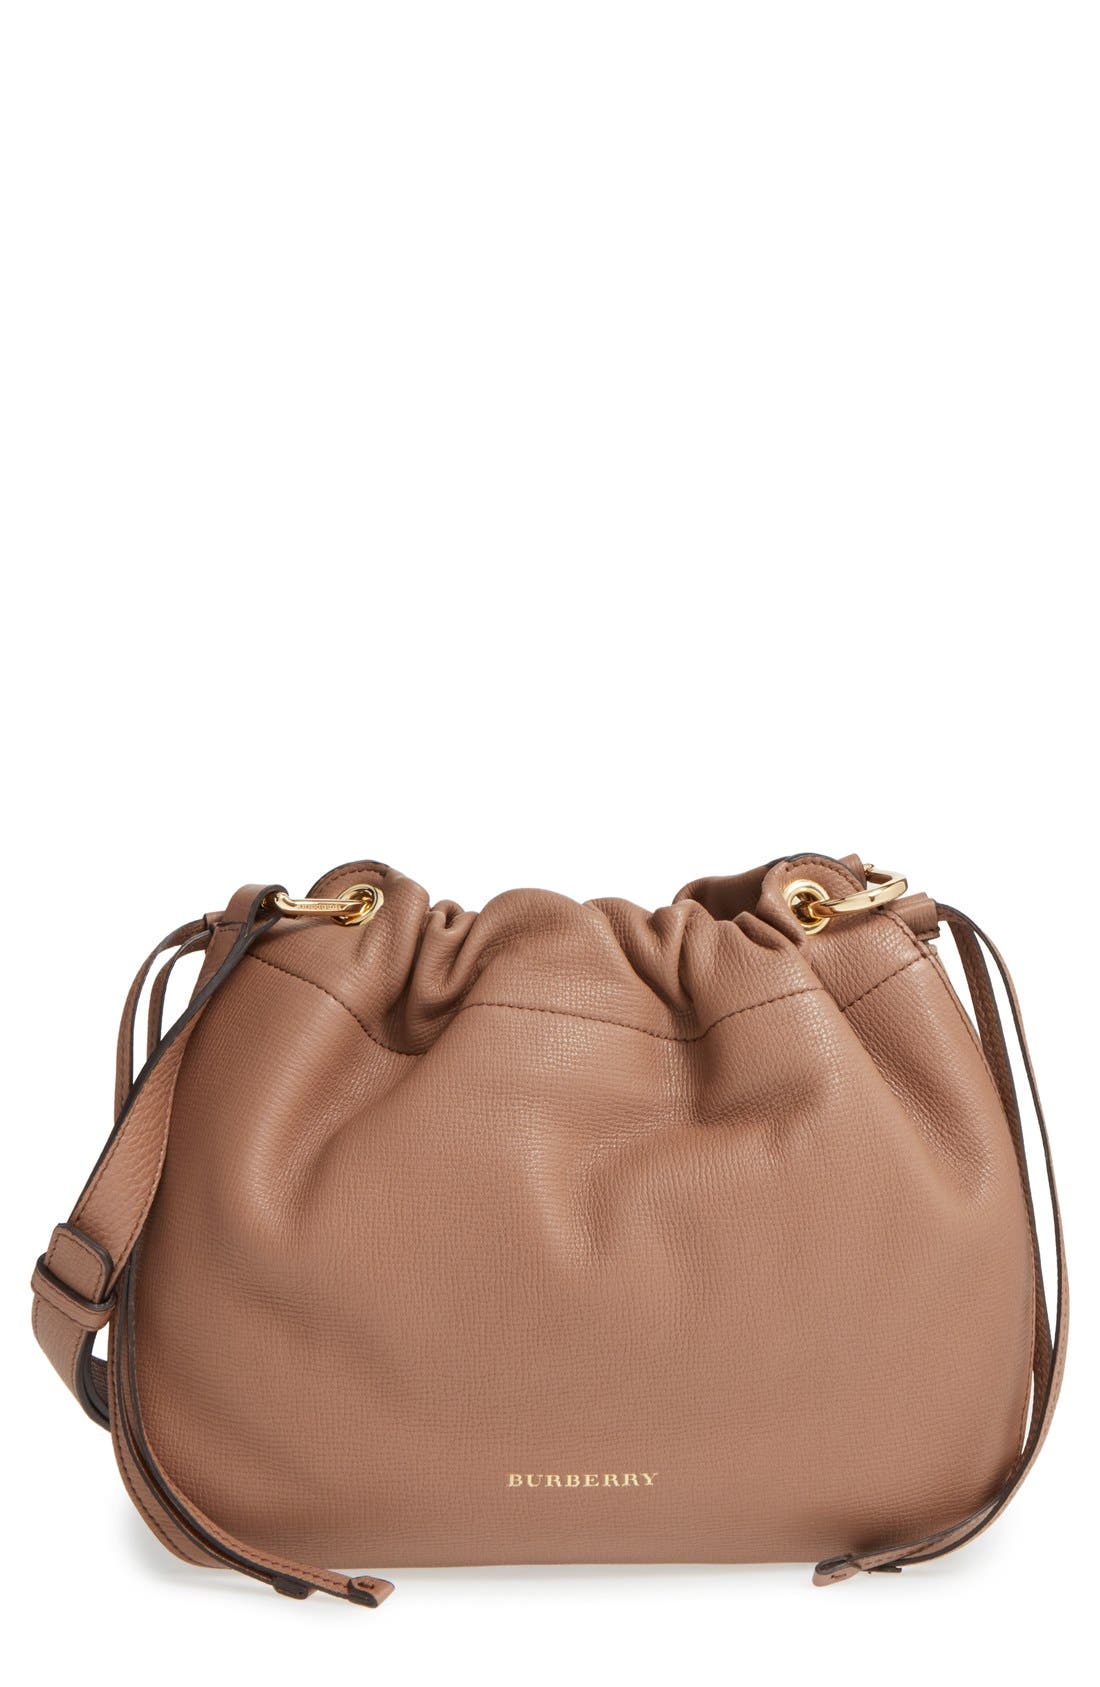 burberry bags sale nordstrom